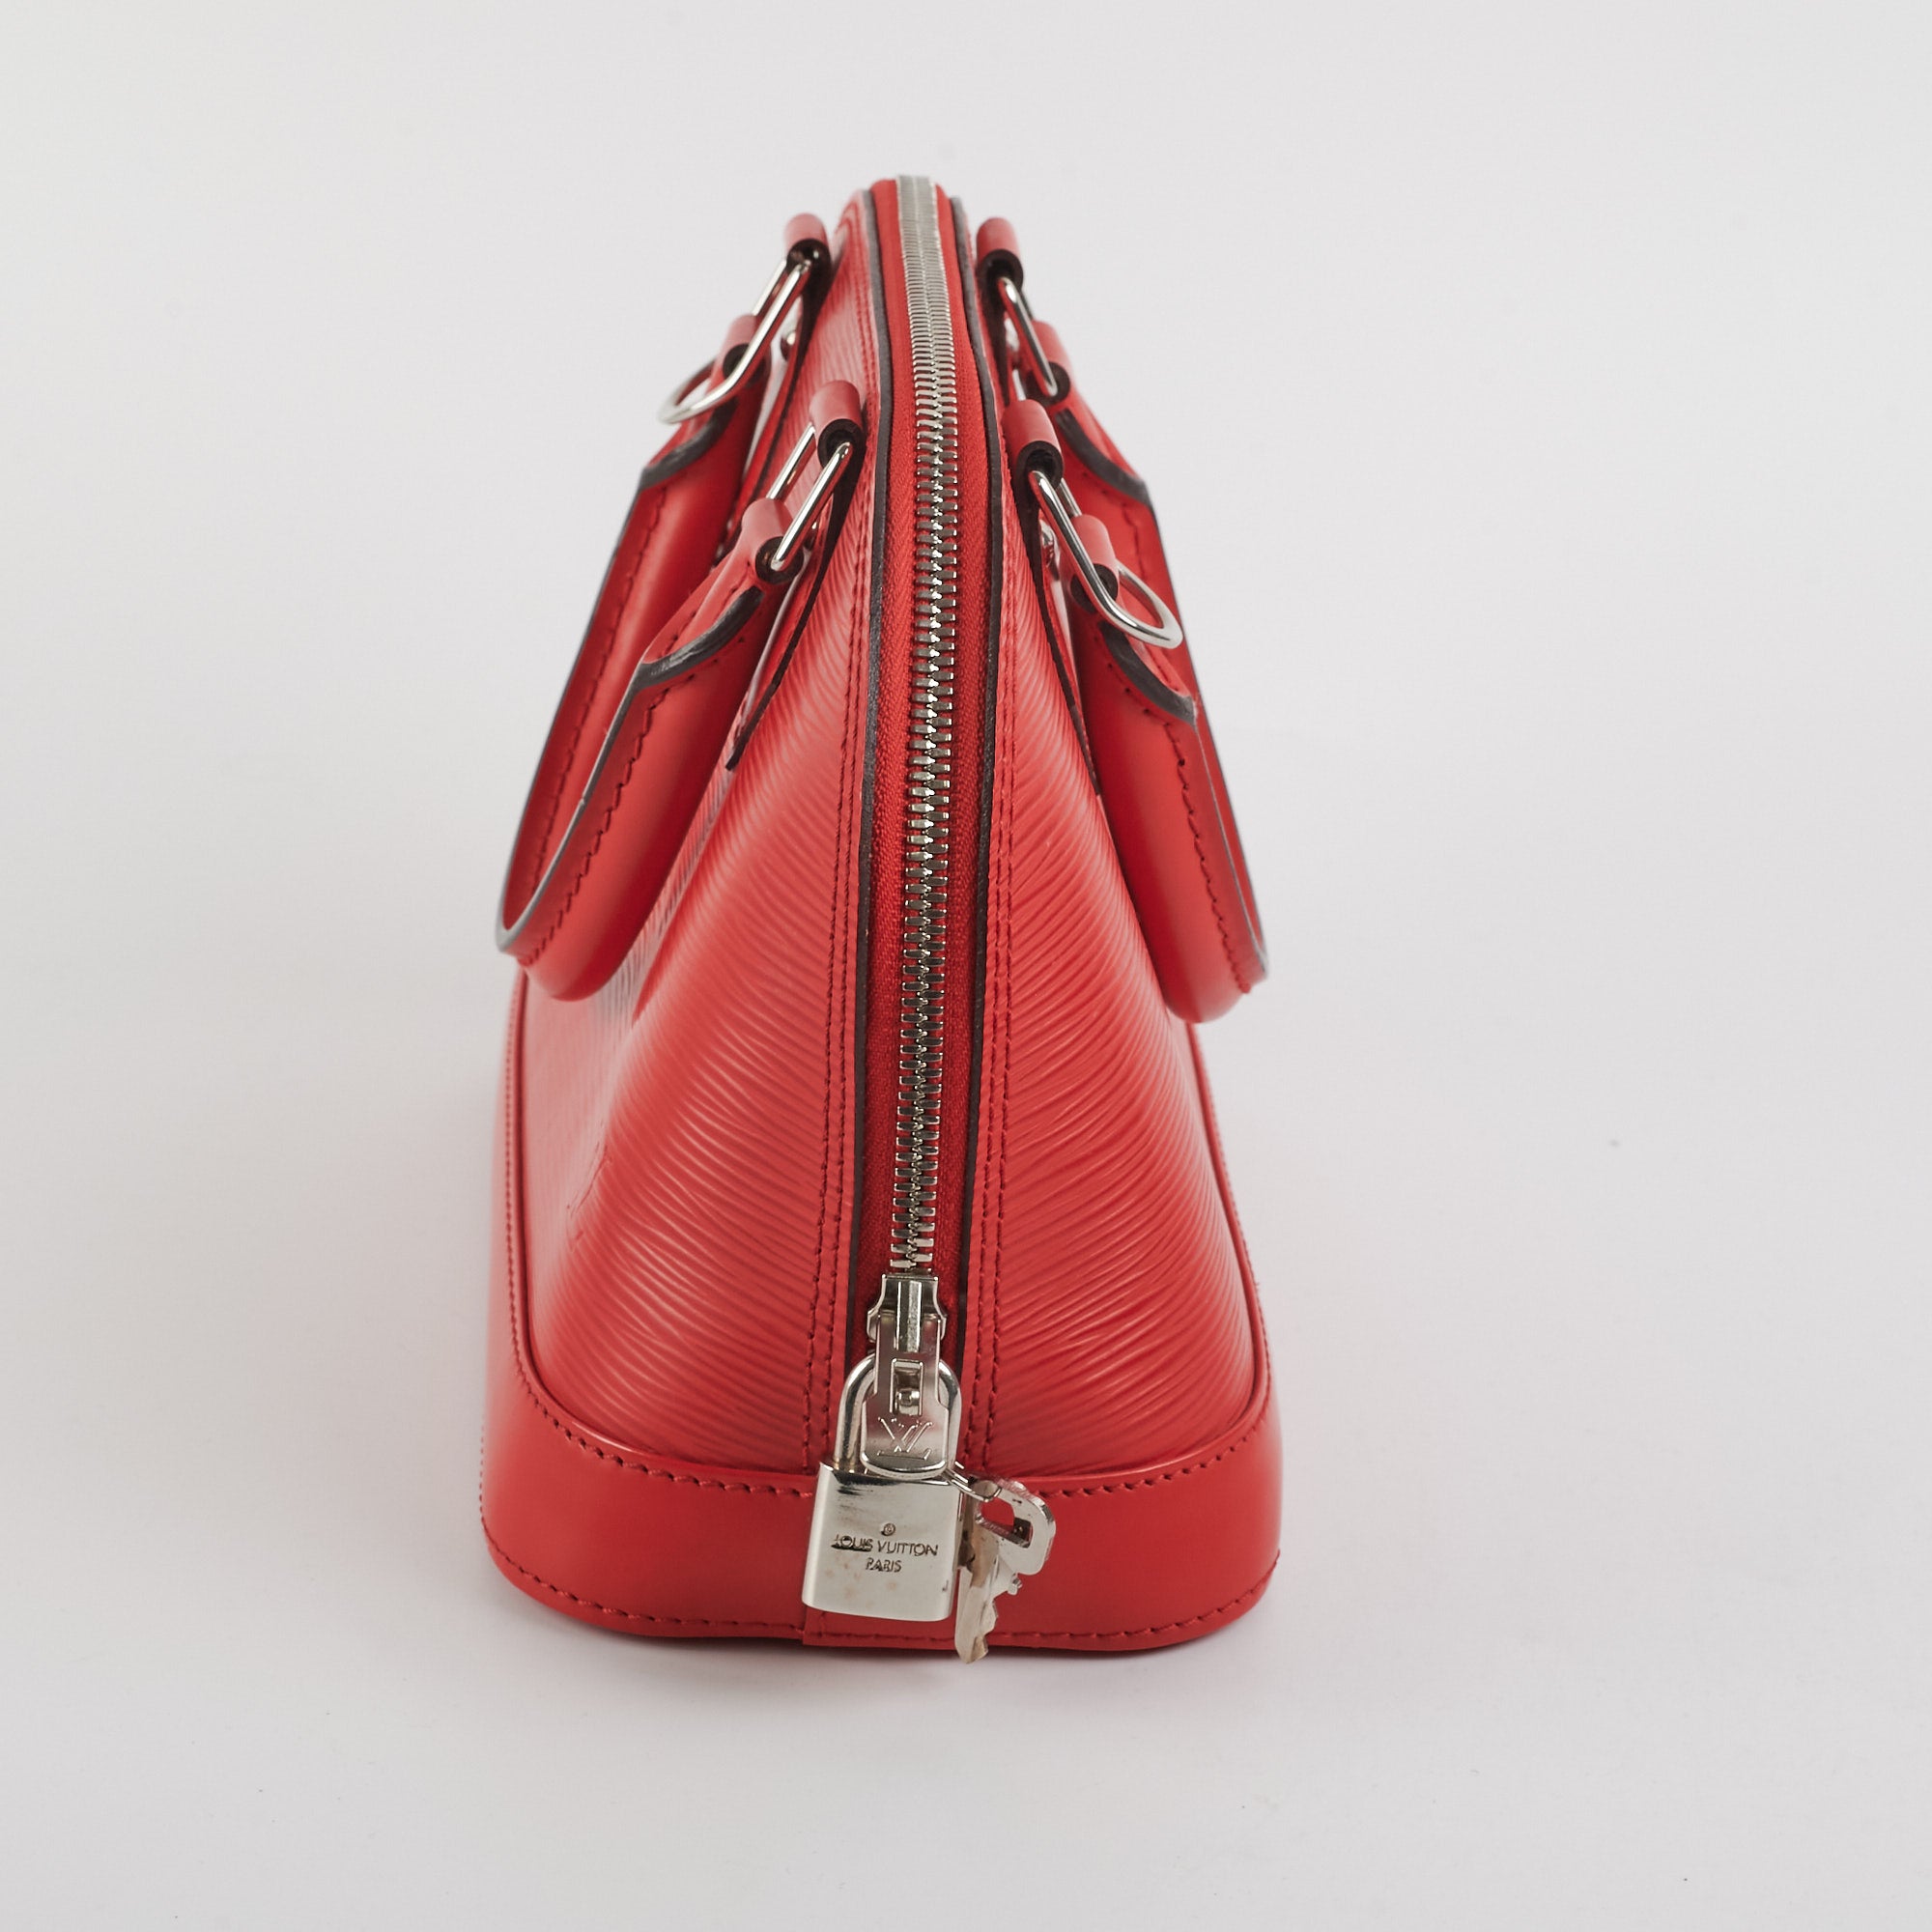 Alma bb leather handbag Louis Vuitton Red in Leather - 33146749